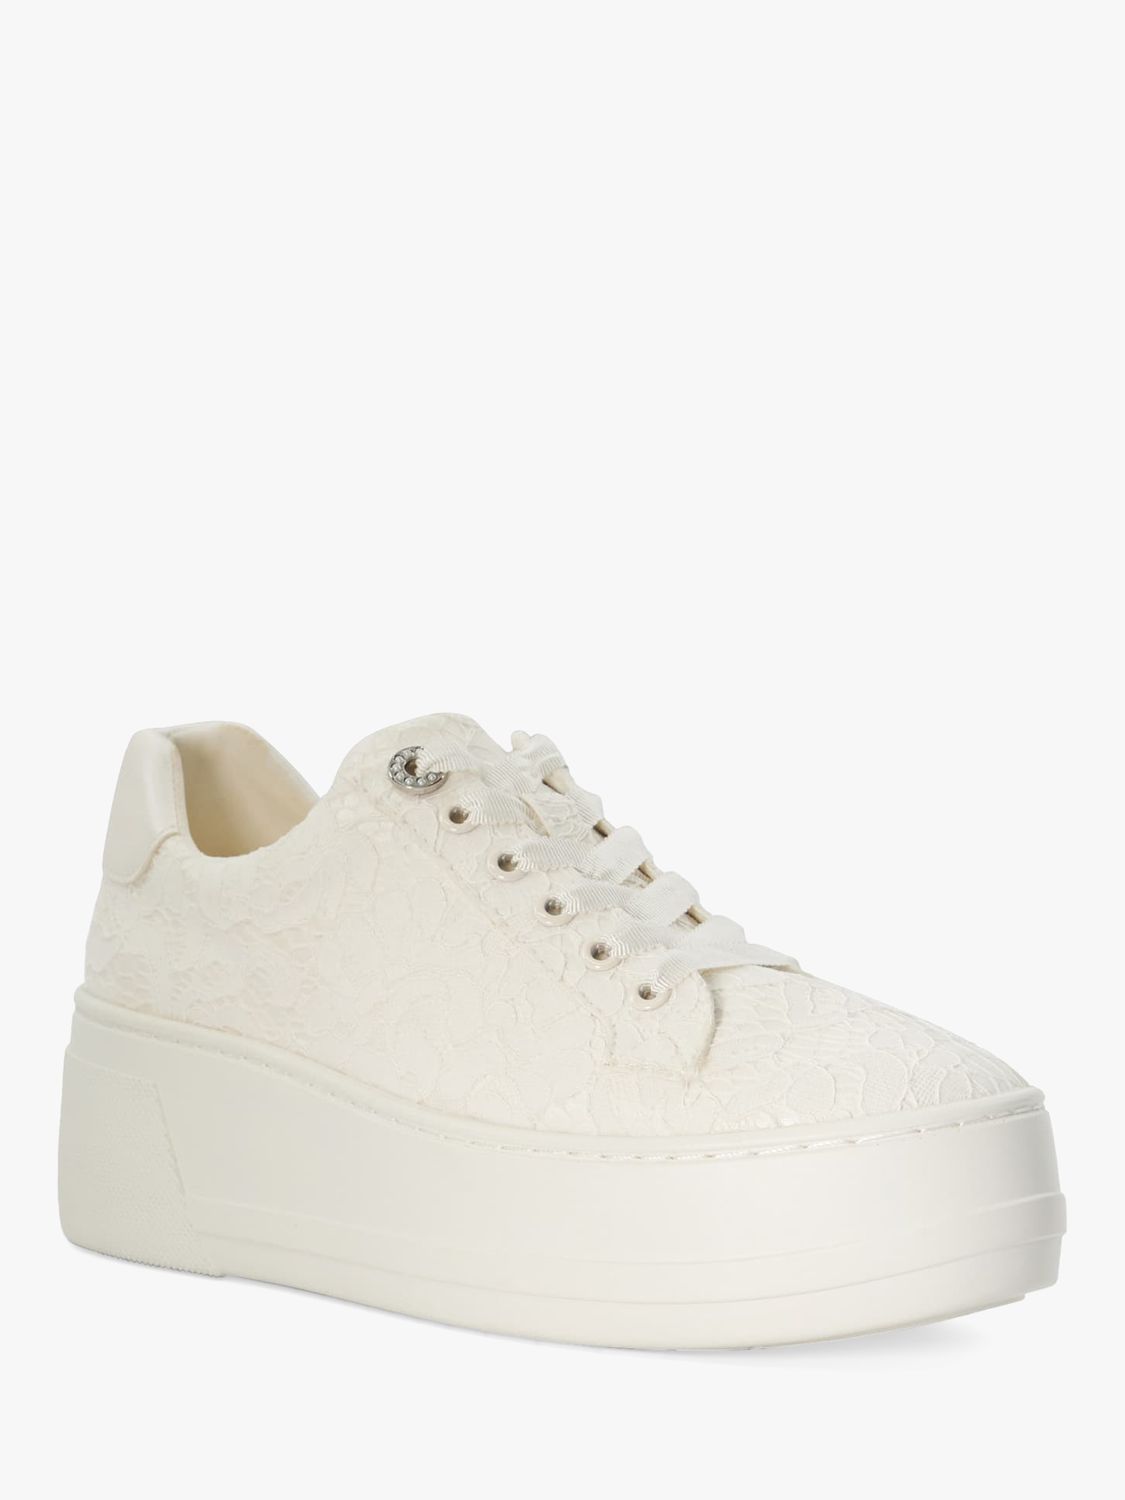 Buy Dune Bridal Collection Embraced Lace Flatform Trainers, Ivory Online at johnlewis.com